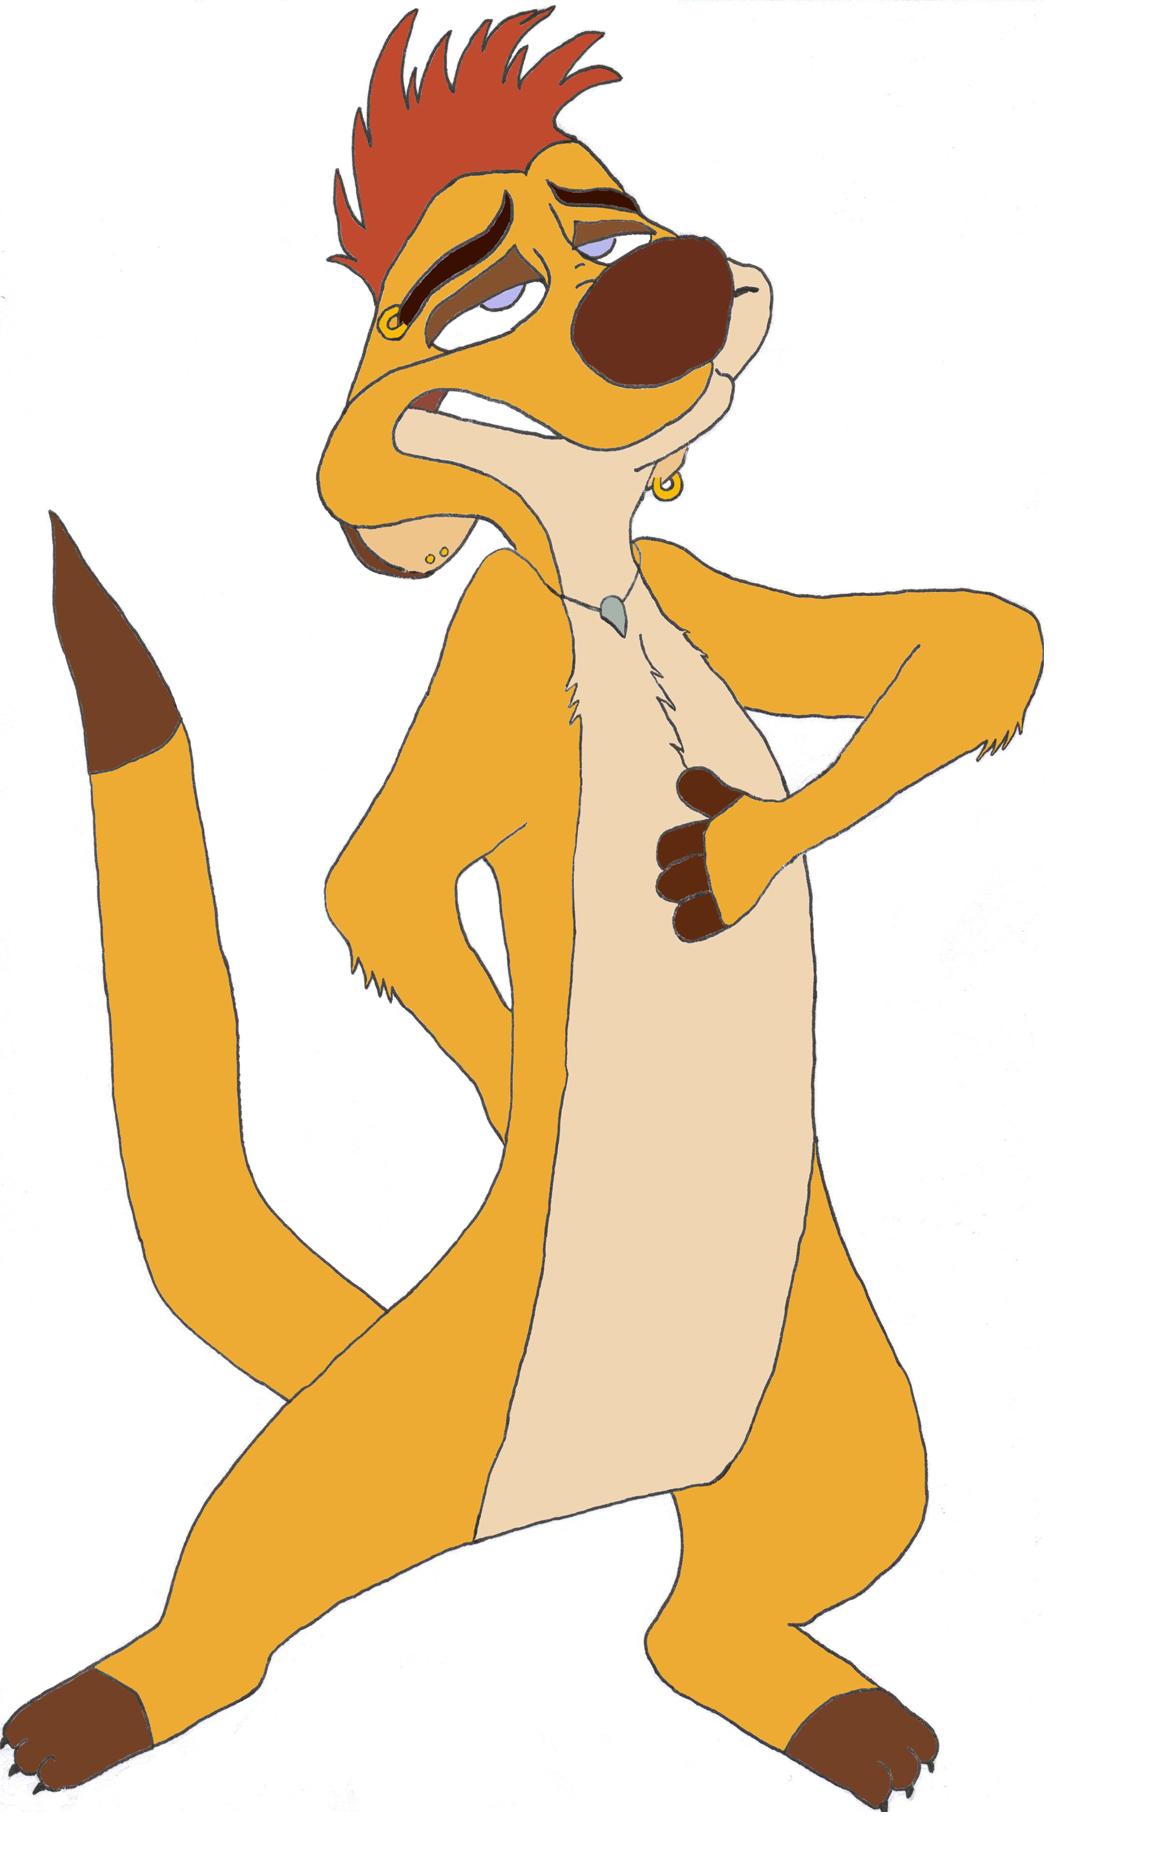 damion the meerkat by daysofthesparrow